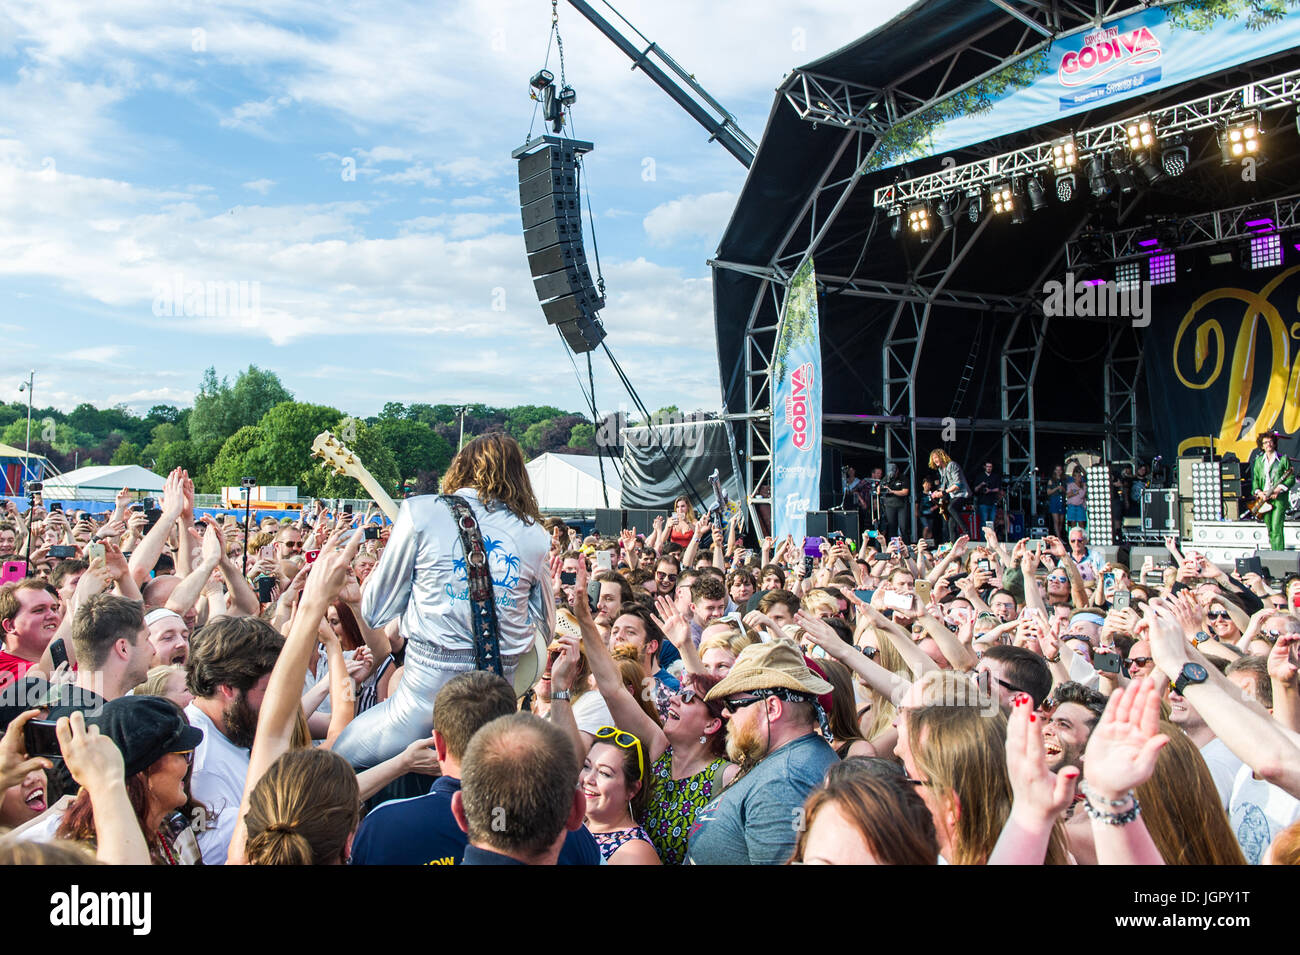 Coventry, UK. 9th July, 2017.  The annual Coventry Godiva Music Festival took place over the weekend with huge crowds attending for the duration of the festival.  The festival finished Sunday evening with The Darkness headlining.  Lead Singer, Justin Hawkins, goes on a walkabout through the crowd during the set.  Credit: Andy Gibson/Alamy Live News. Stock Photo